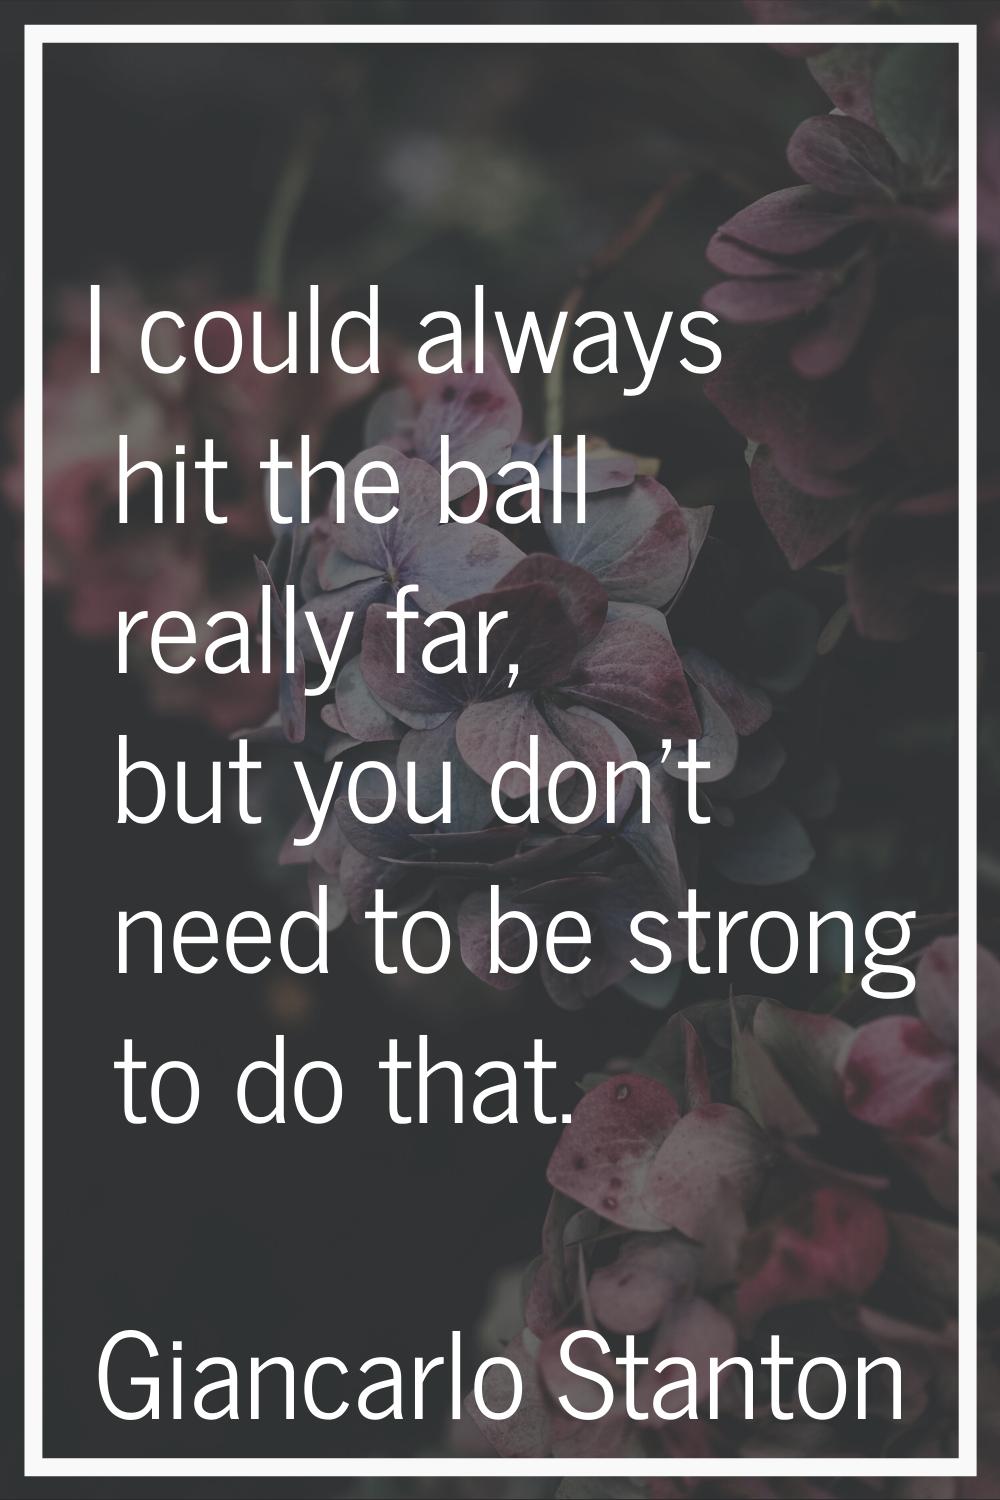 I could always hit the ball really far, but you don't need to be strong to do that.